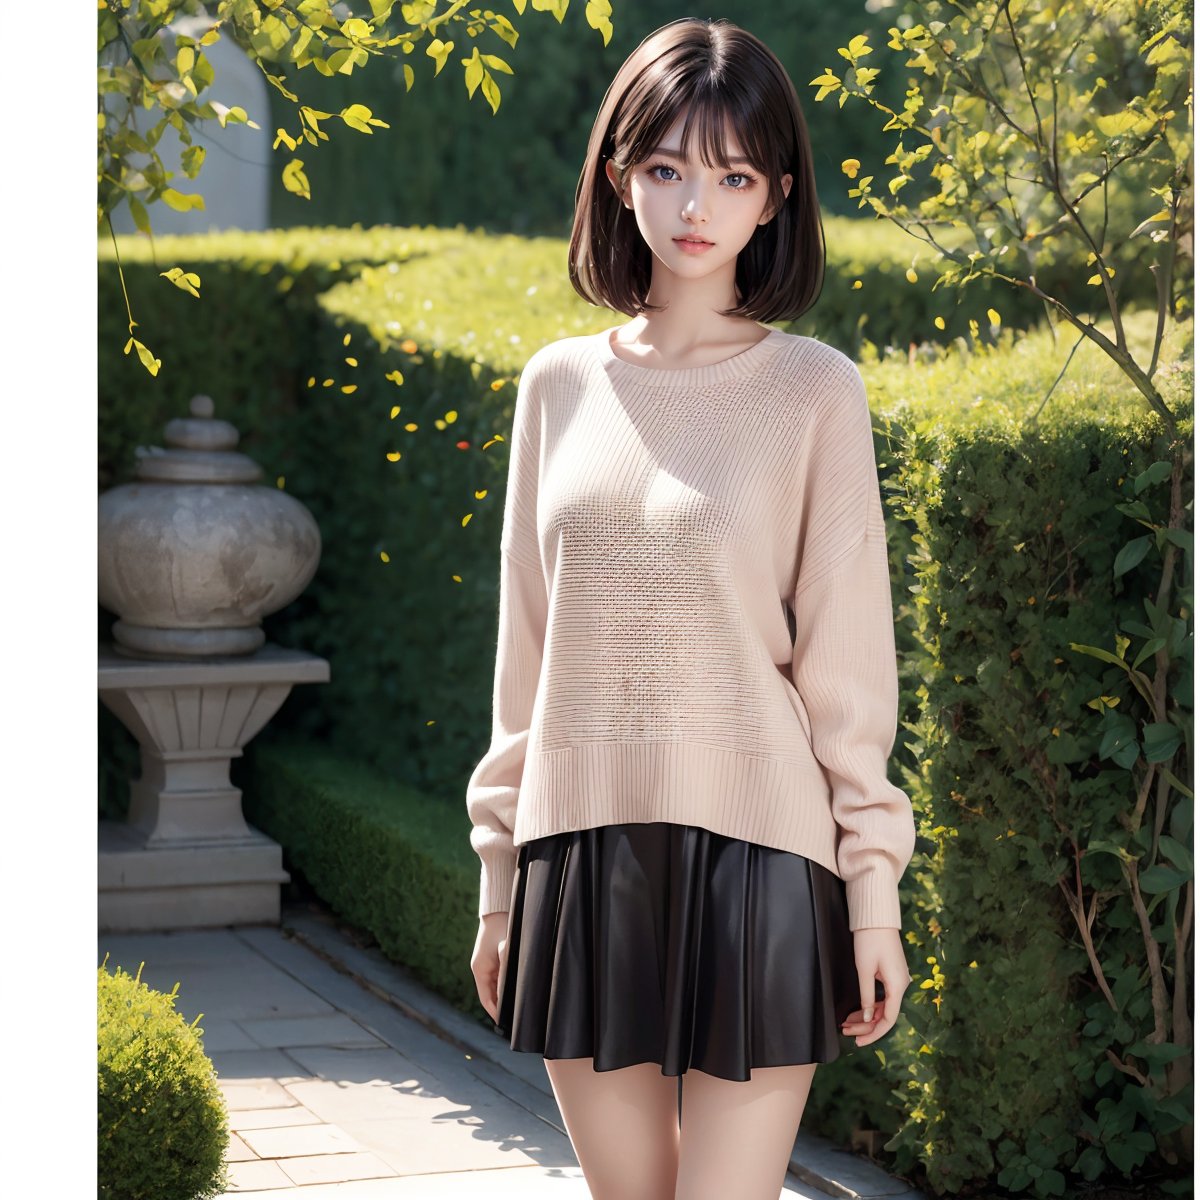 This captivating and visually stunning fractal art depicts a woman. The official art gives her a strong aesthetic appeal. 4K high resolution rendering. 19 year old Japanese female. Black, straight, short hair with bangs. Dark eyes, short eyelashes, small breasts, elongated beautiful legs, supple arms. Standing posture.
Costume: light pink sweater. Gray skirt.
Season: Spring.
Location: Luxurious garden.
1 girl. JAPANESE GIRL, akkoj